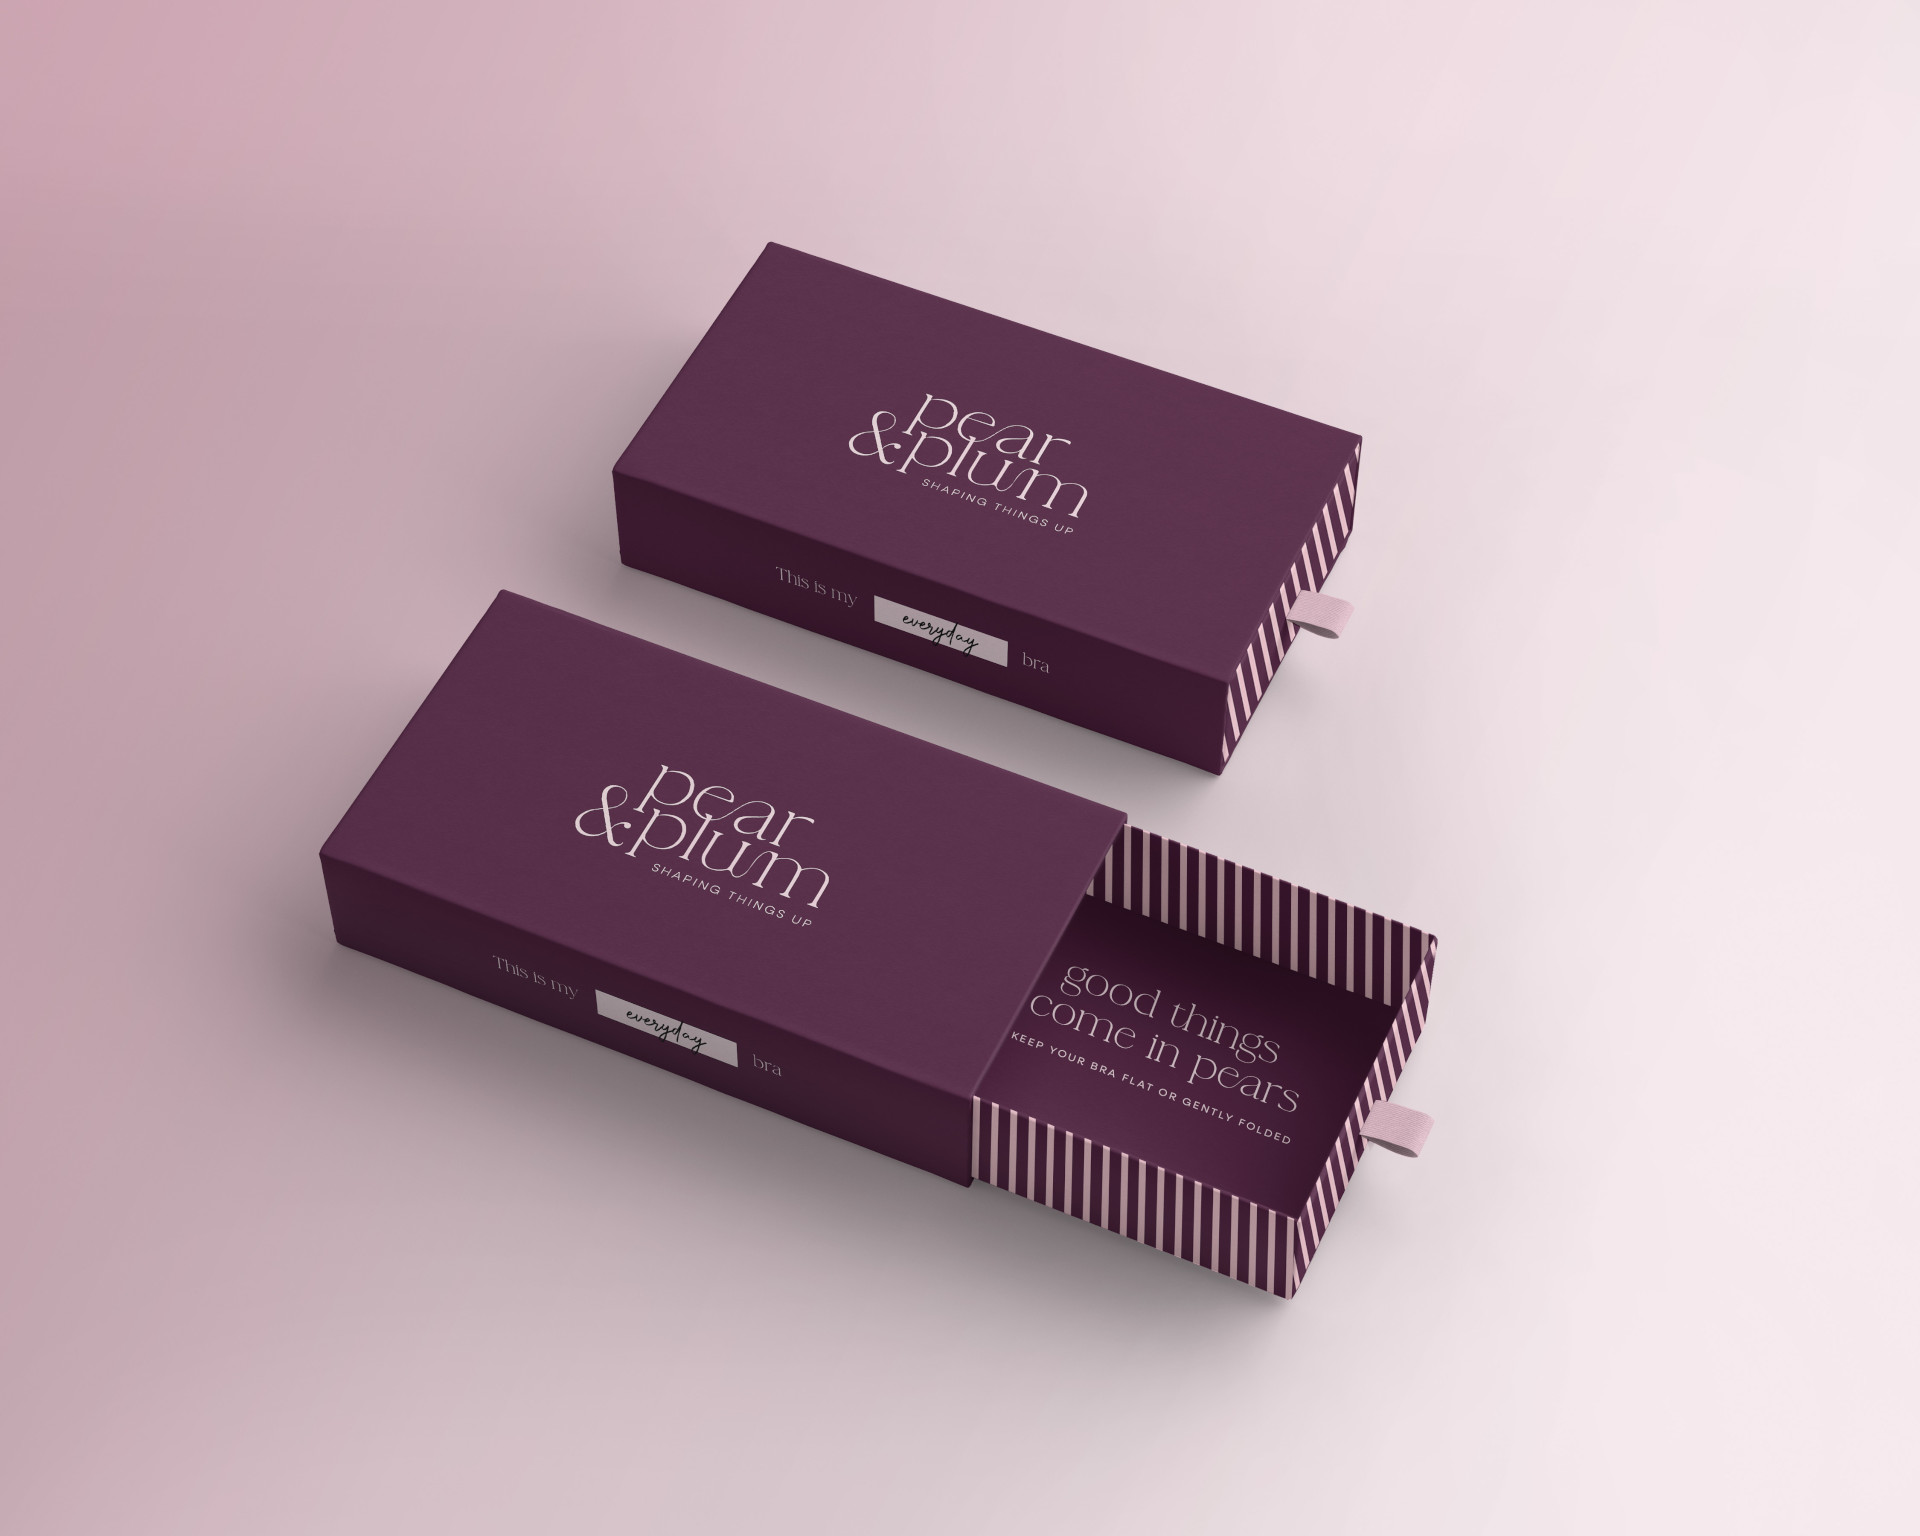 Two purple sliding boxes, one shut and one open, with Pear & Plum brand logo